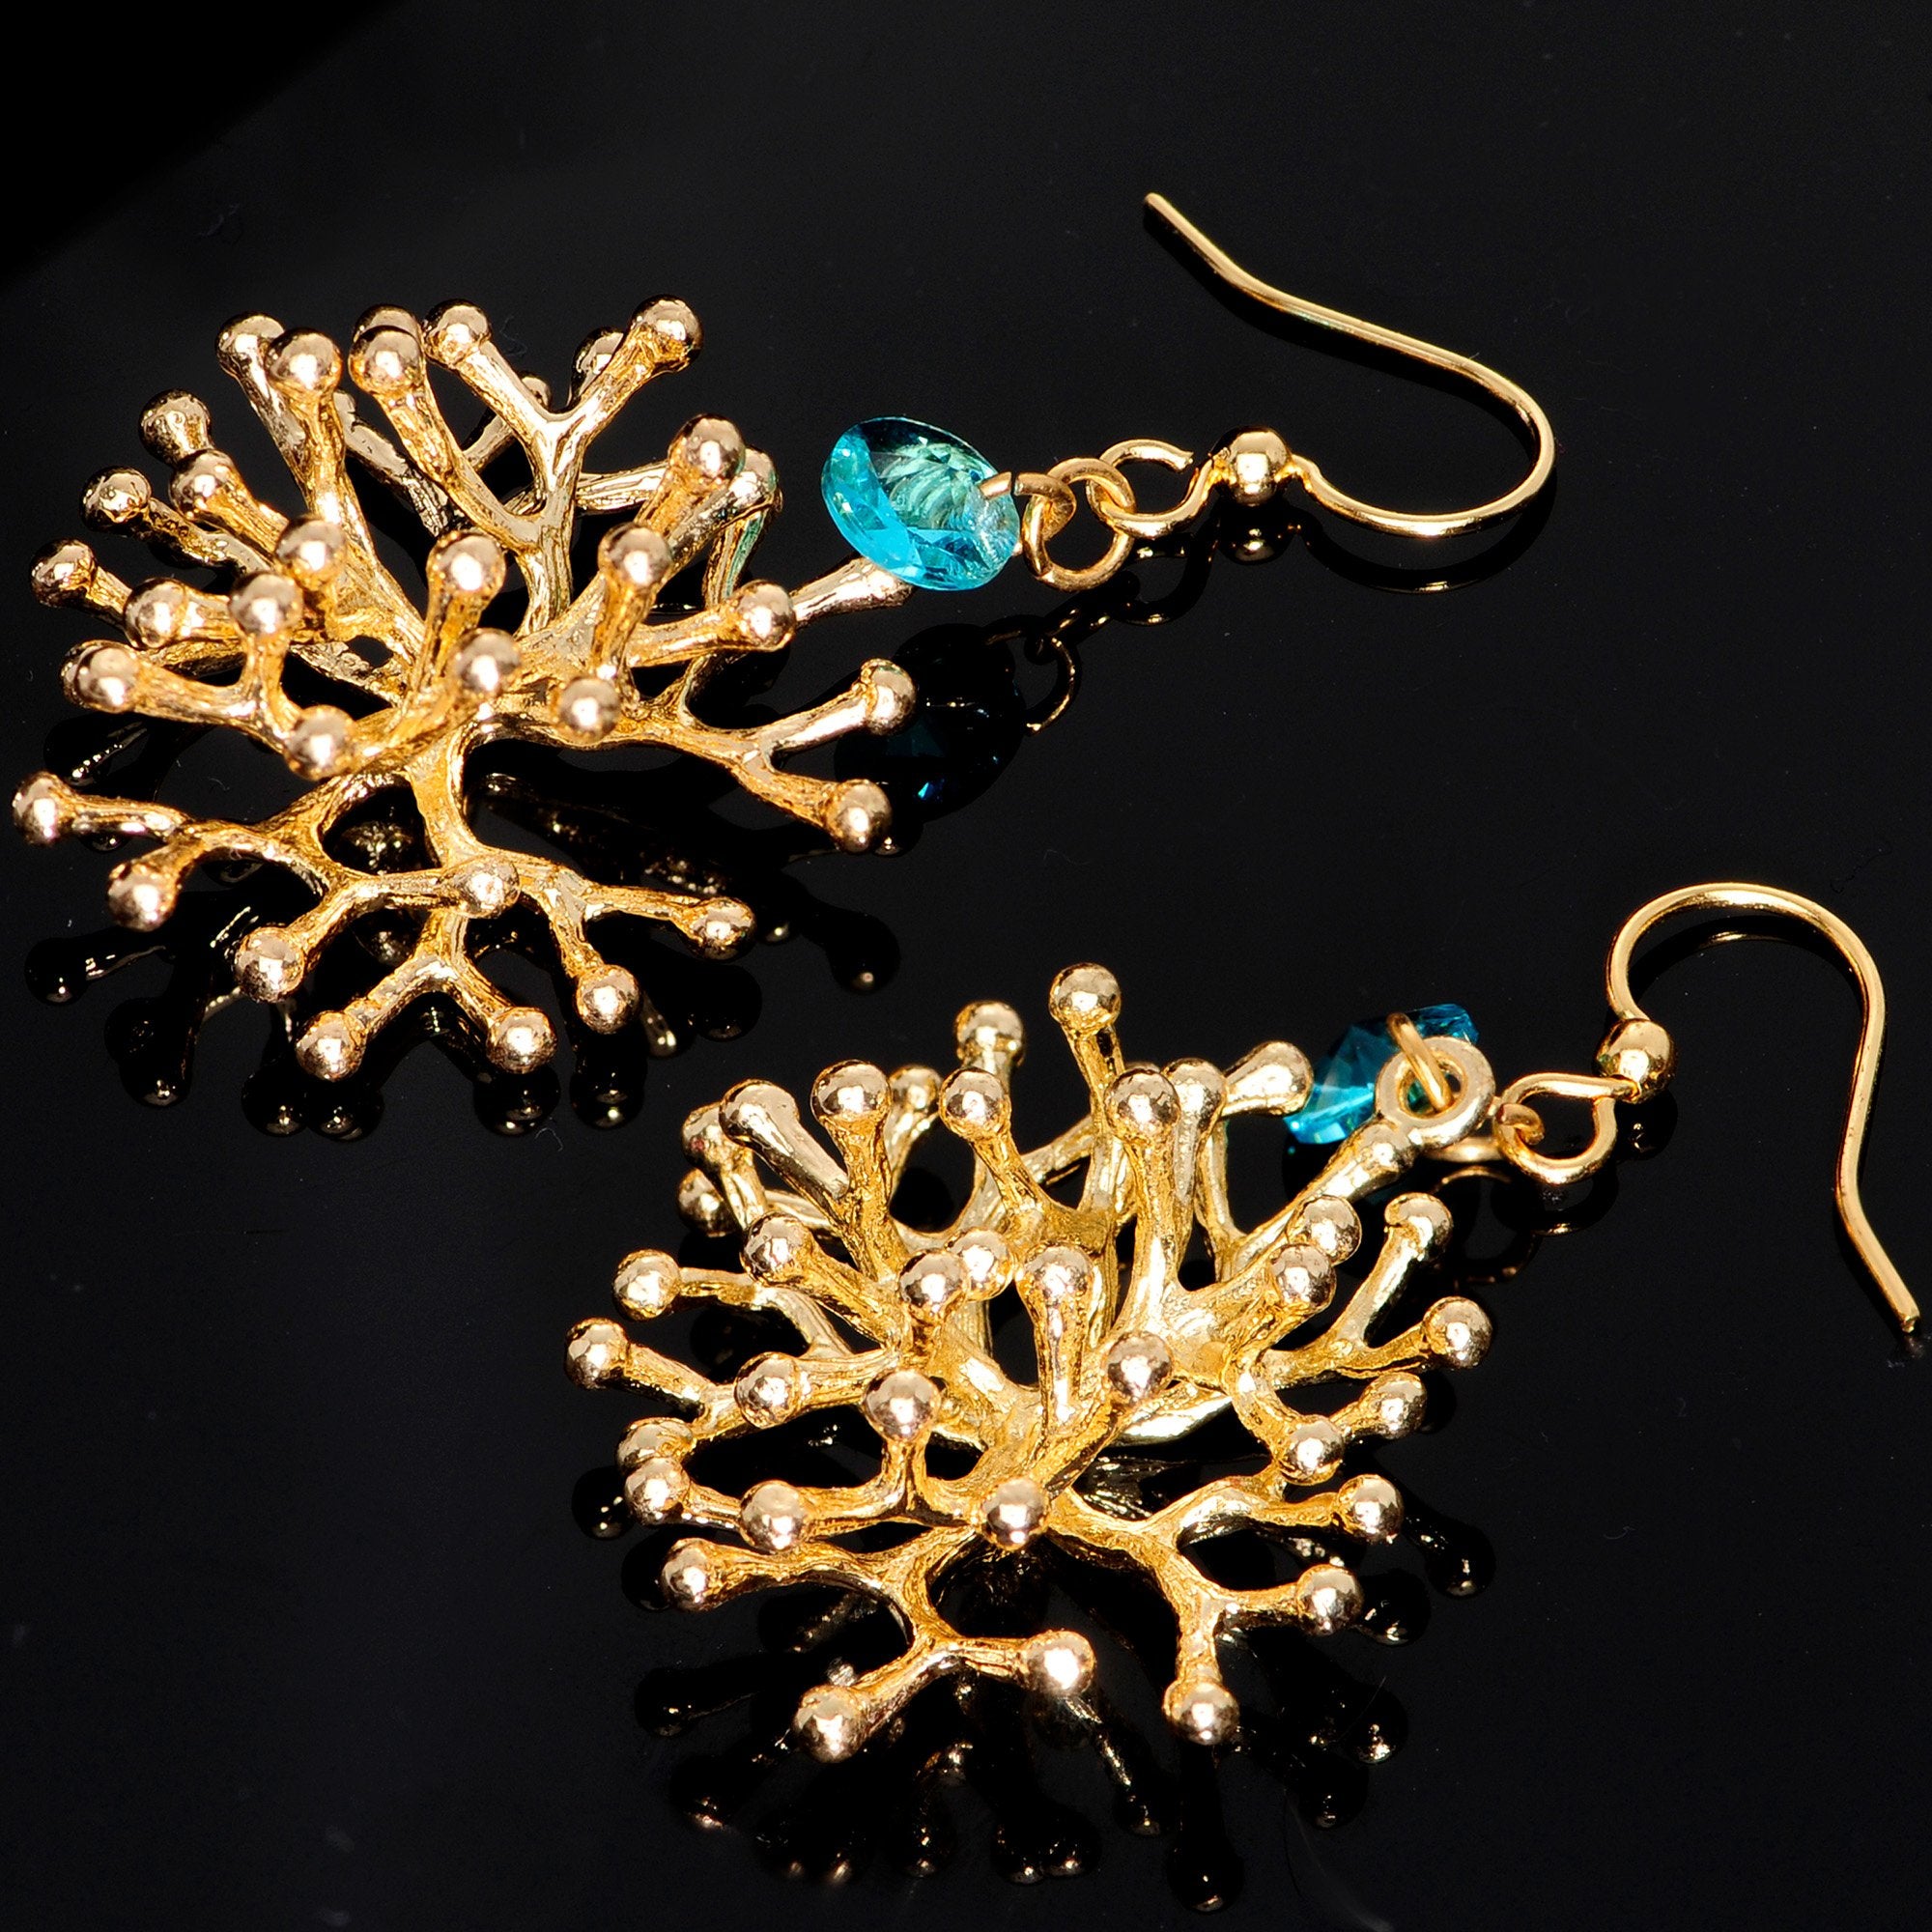 Handmade Sea Coral Fishhook Earrings Created with Crystals